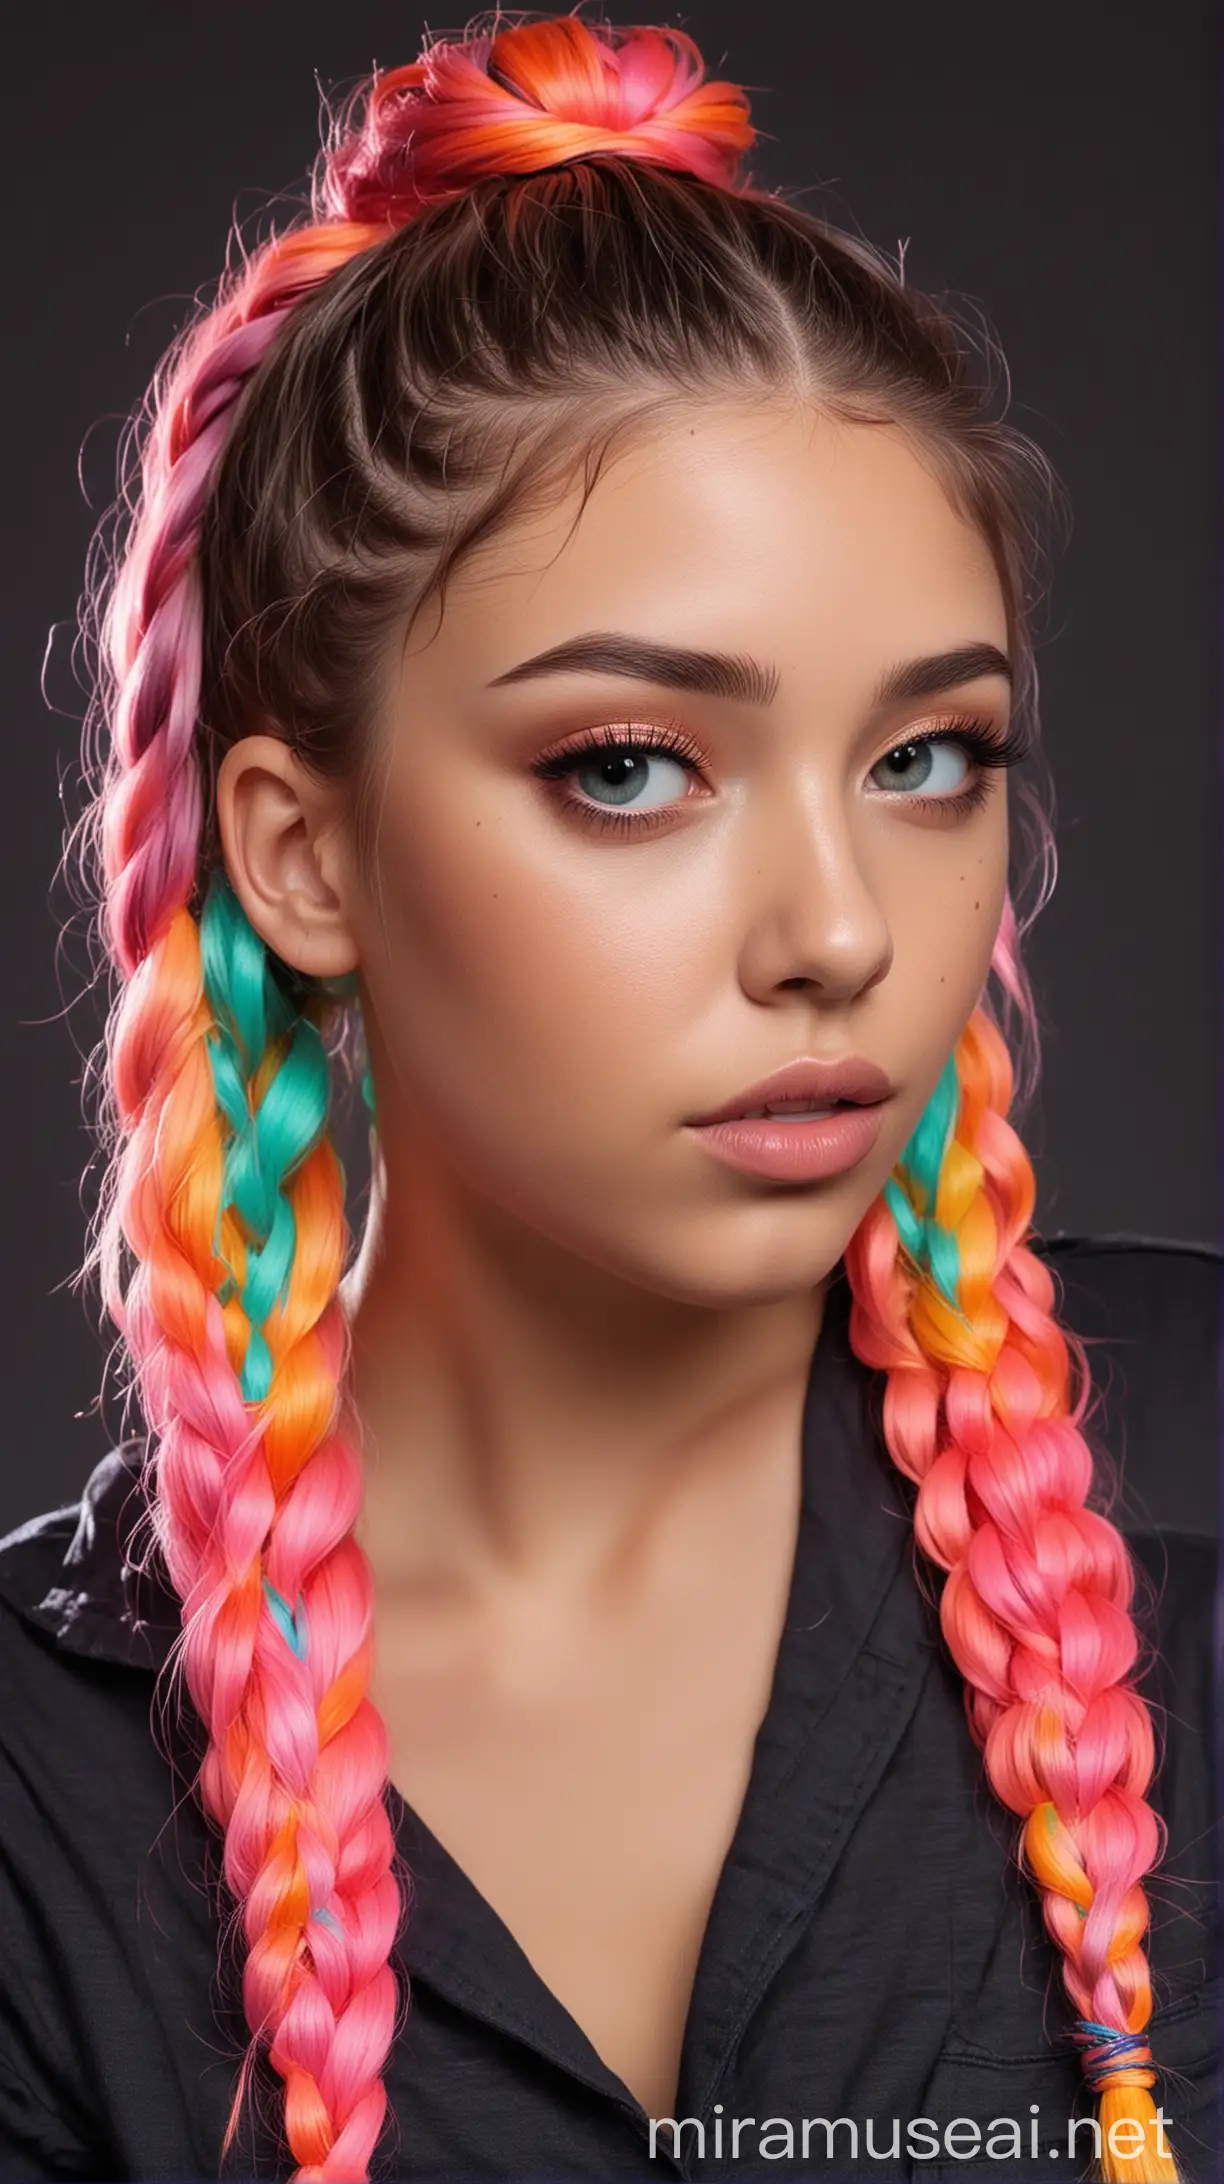 Draw a young woman, 25 years old, with bright neon-colored braids that glow in the dark. Her hairstyle is perfect for women who love to party and want to make a statement.